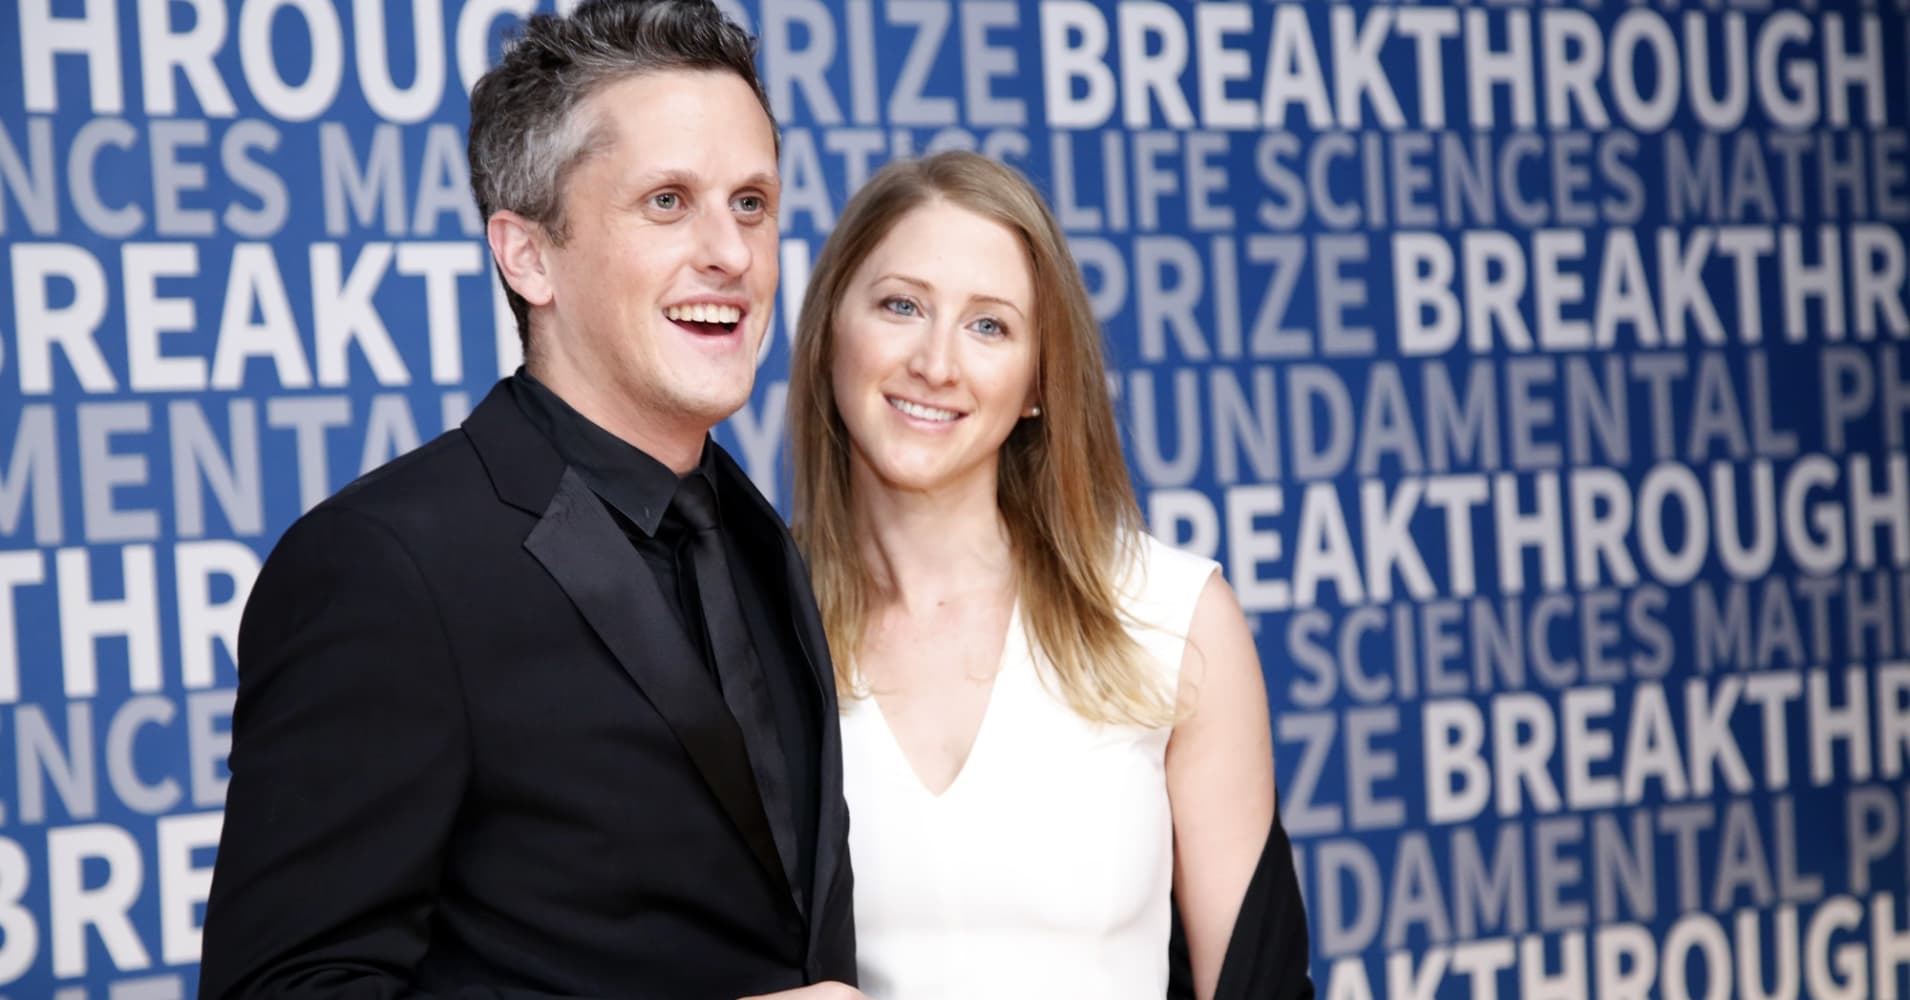 CEO of Box Aaron Levie and CEO of Paradigm Joelle Emerson attend the 2017 Breakthrough Prize.